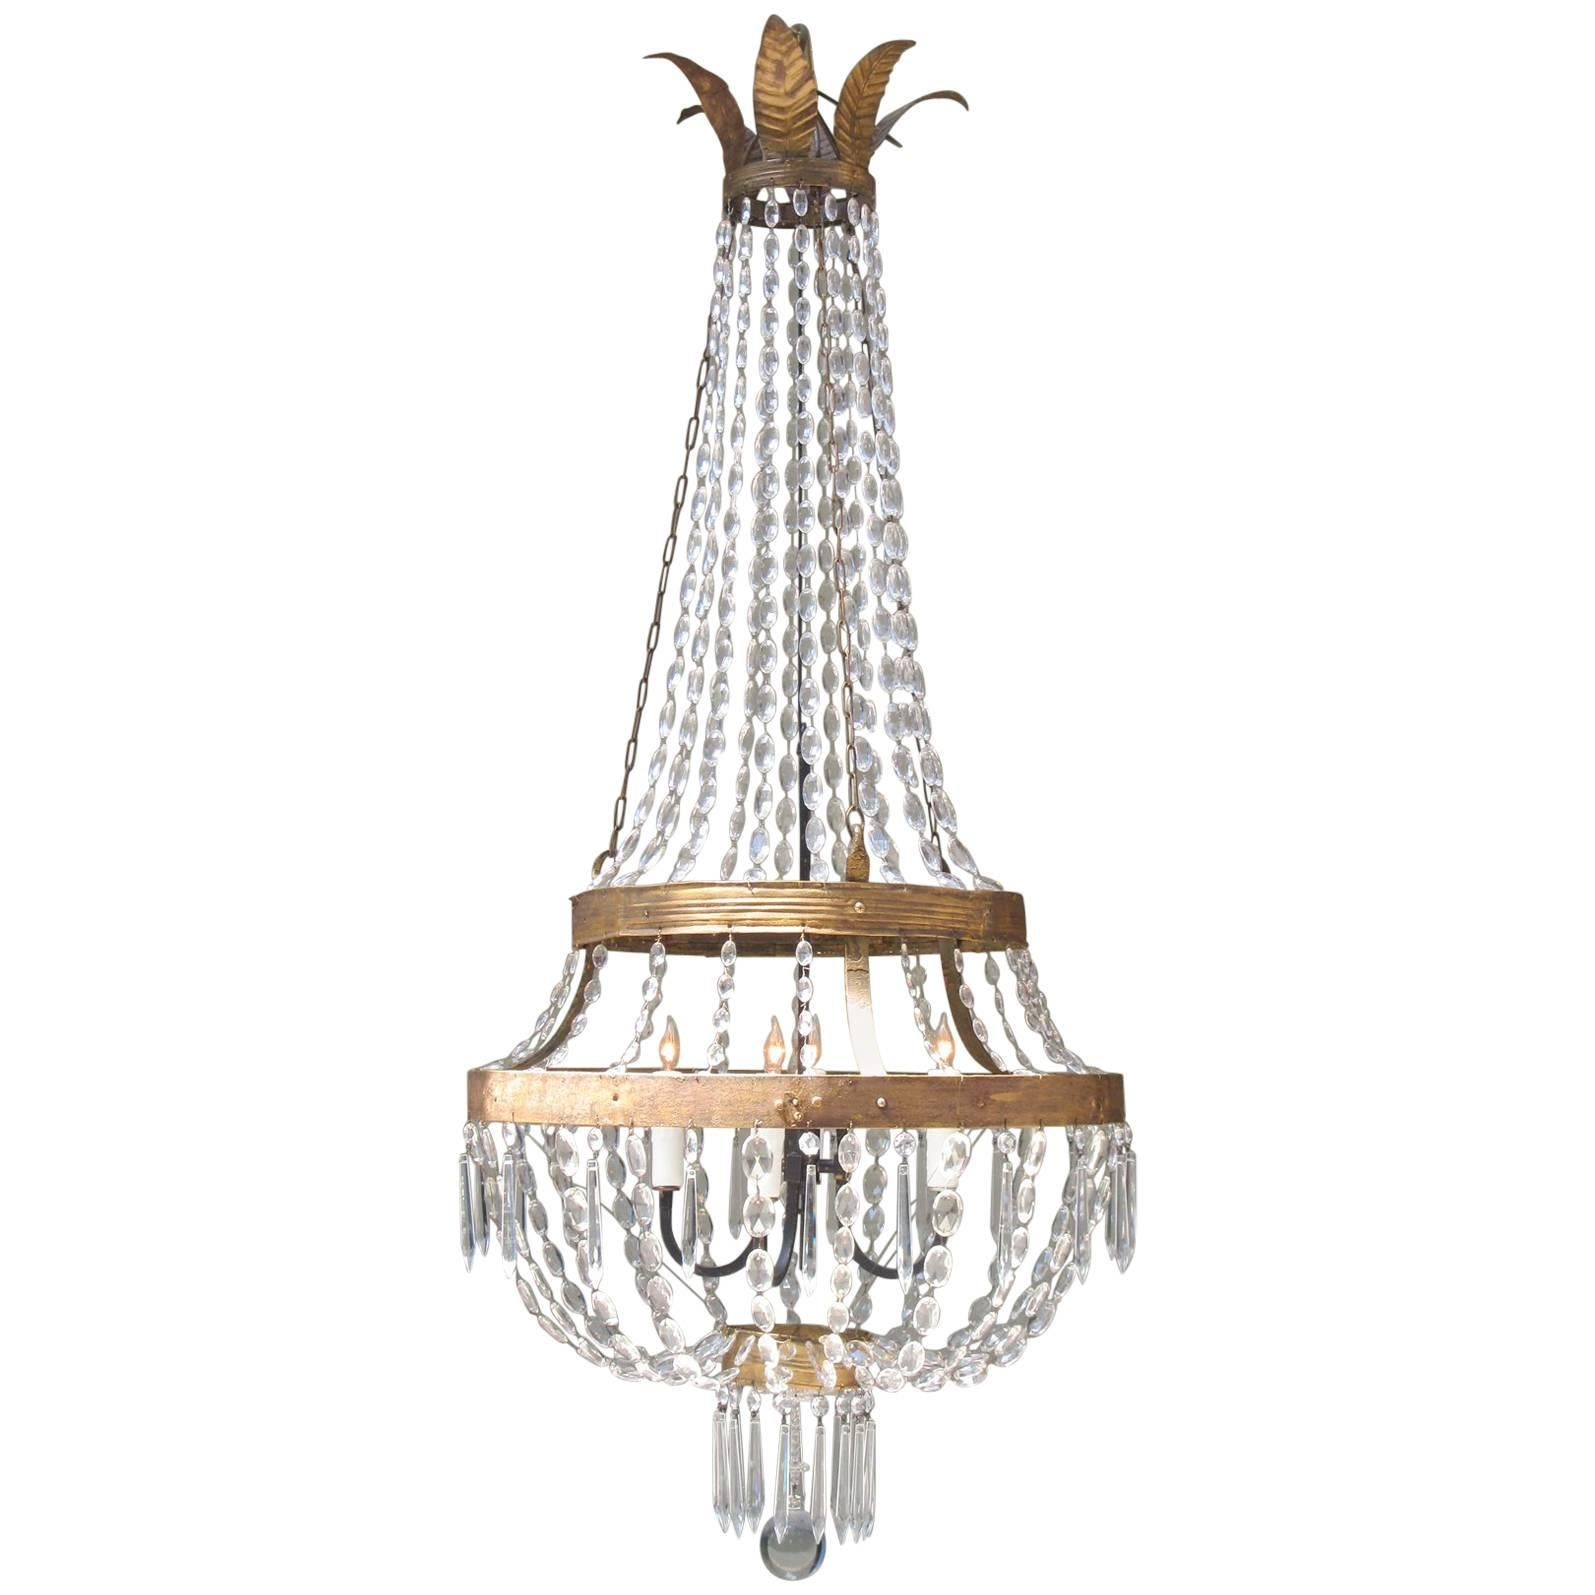 18th Century Italian Empire Iron, Crystal and Tole Basket Chandelier